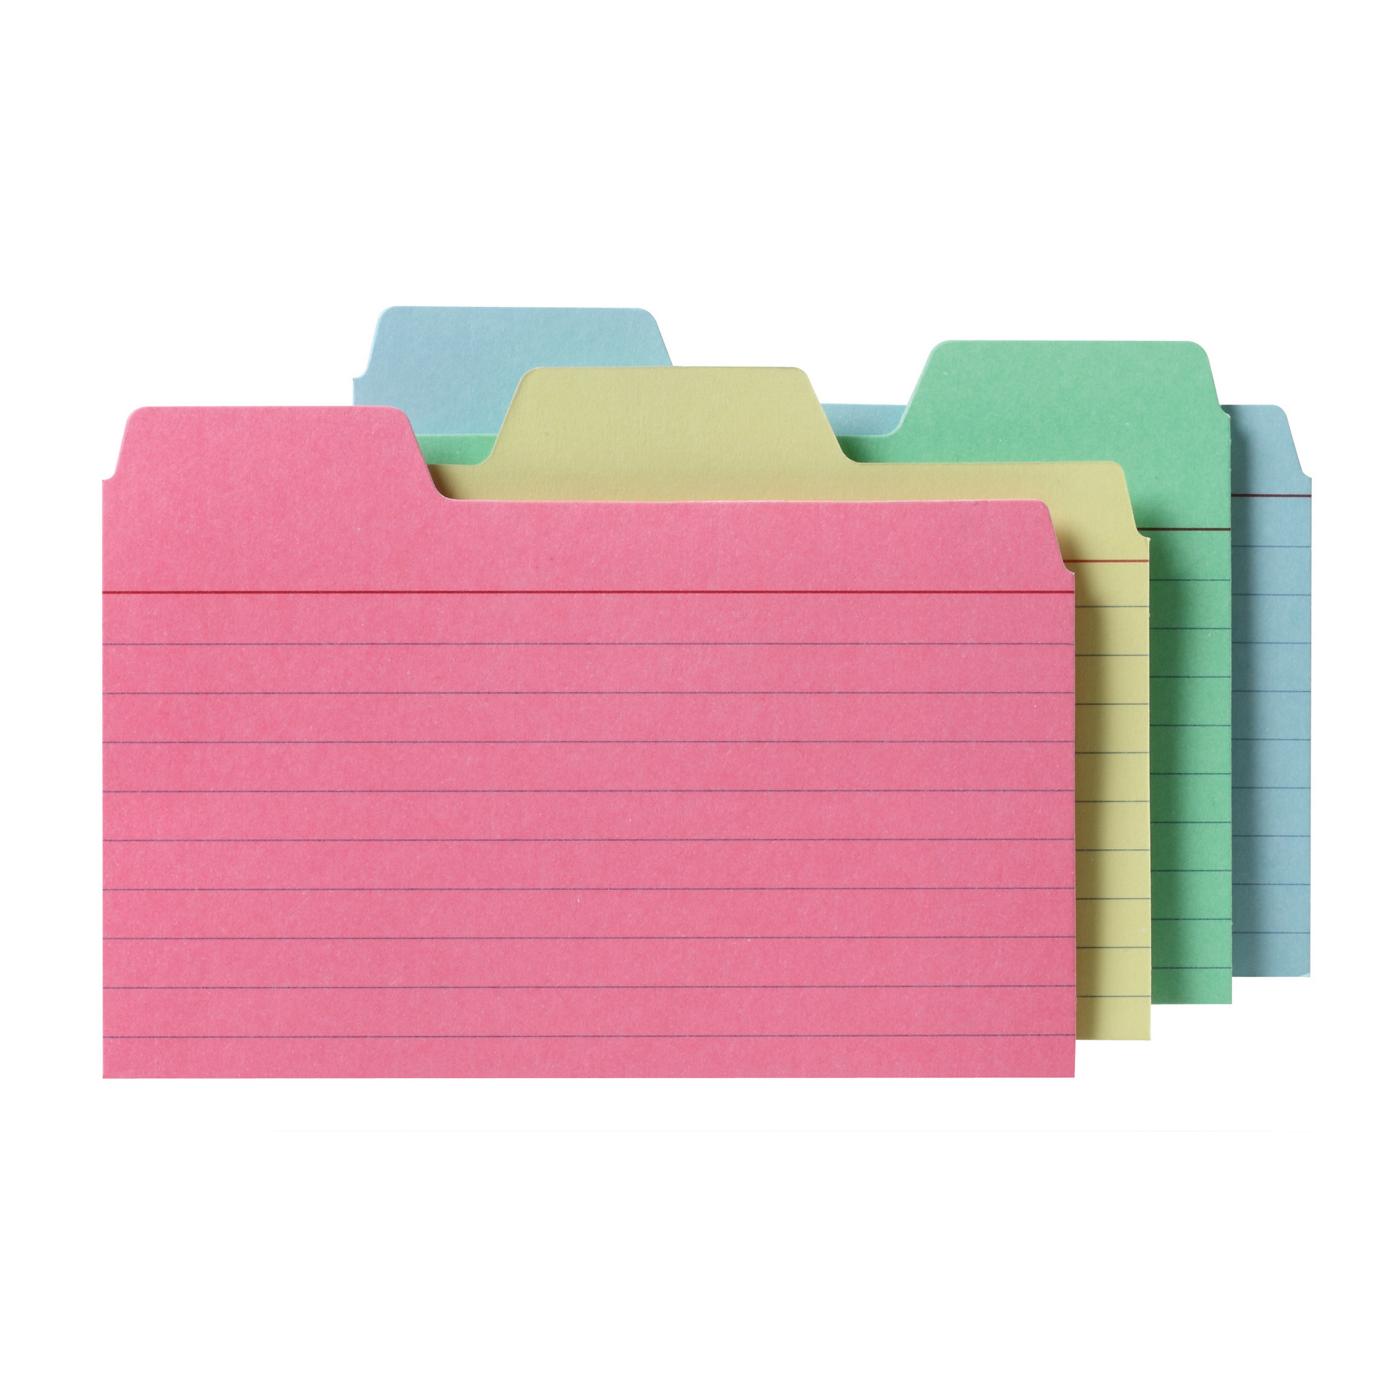 Find It Tabbed Index Cards - Assorted Colors, 48 Ct; image 2 of 2